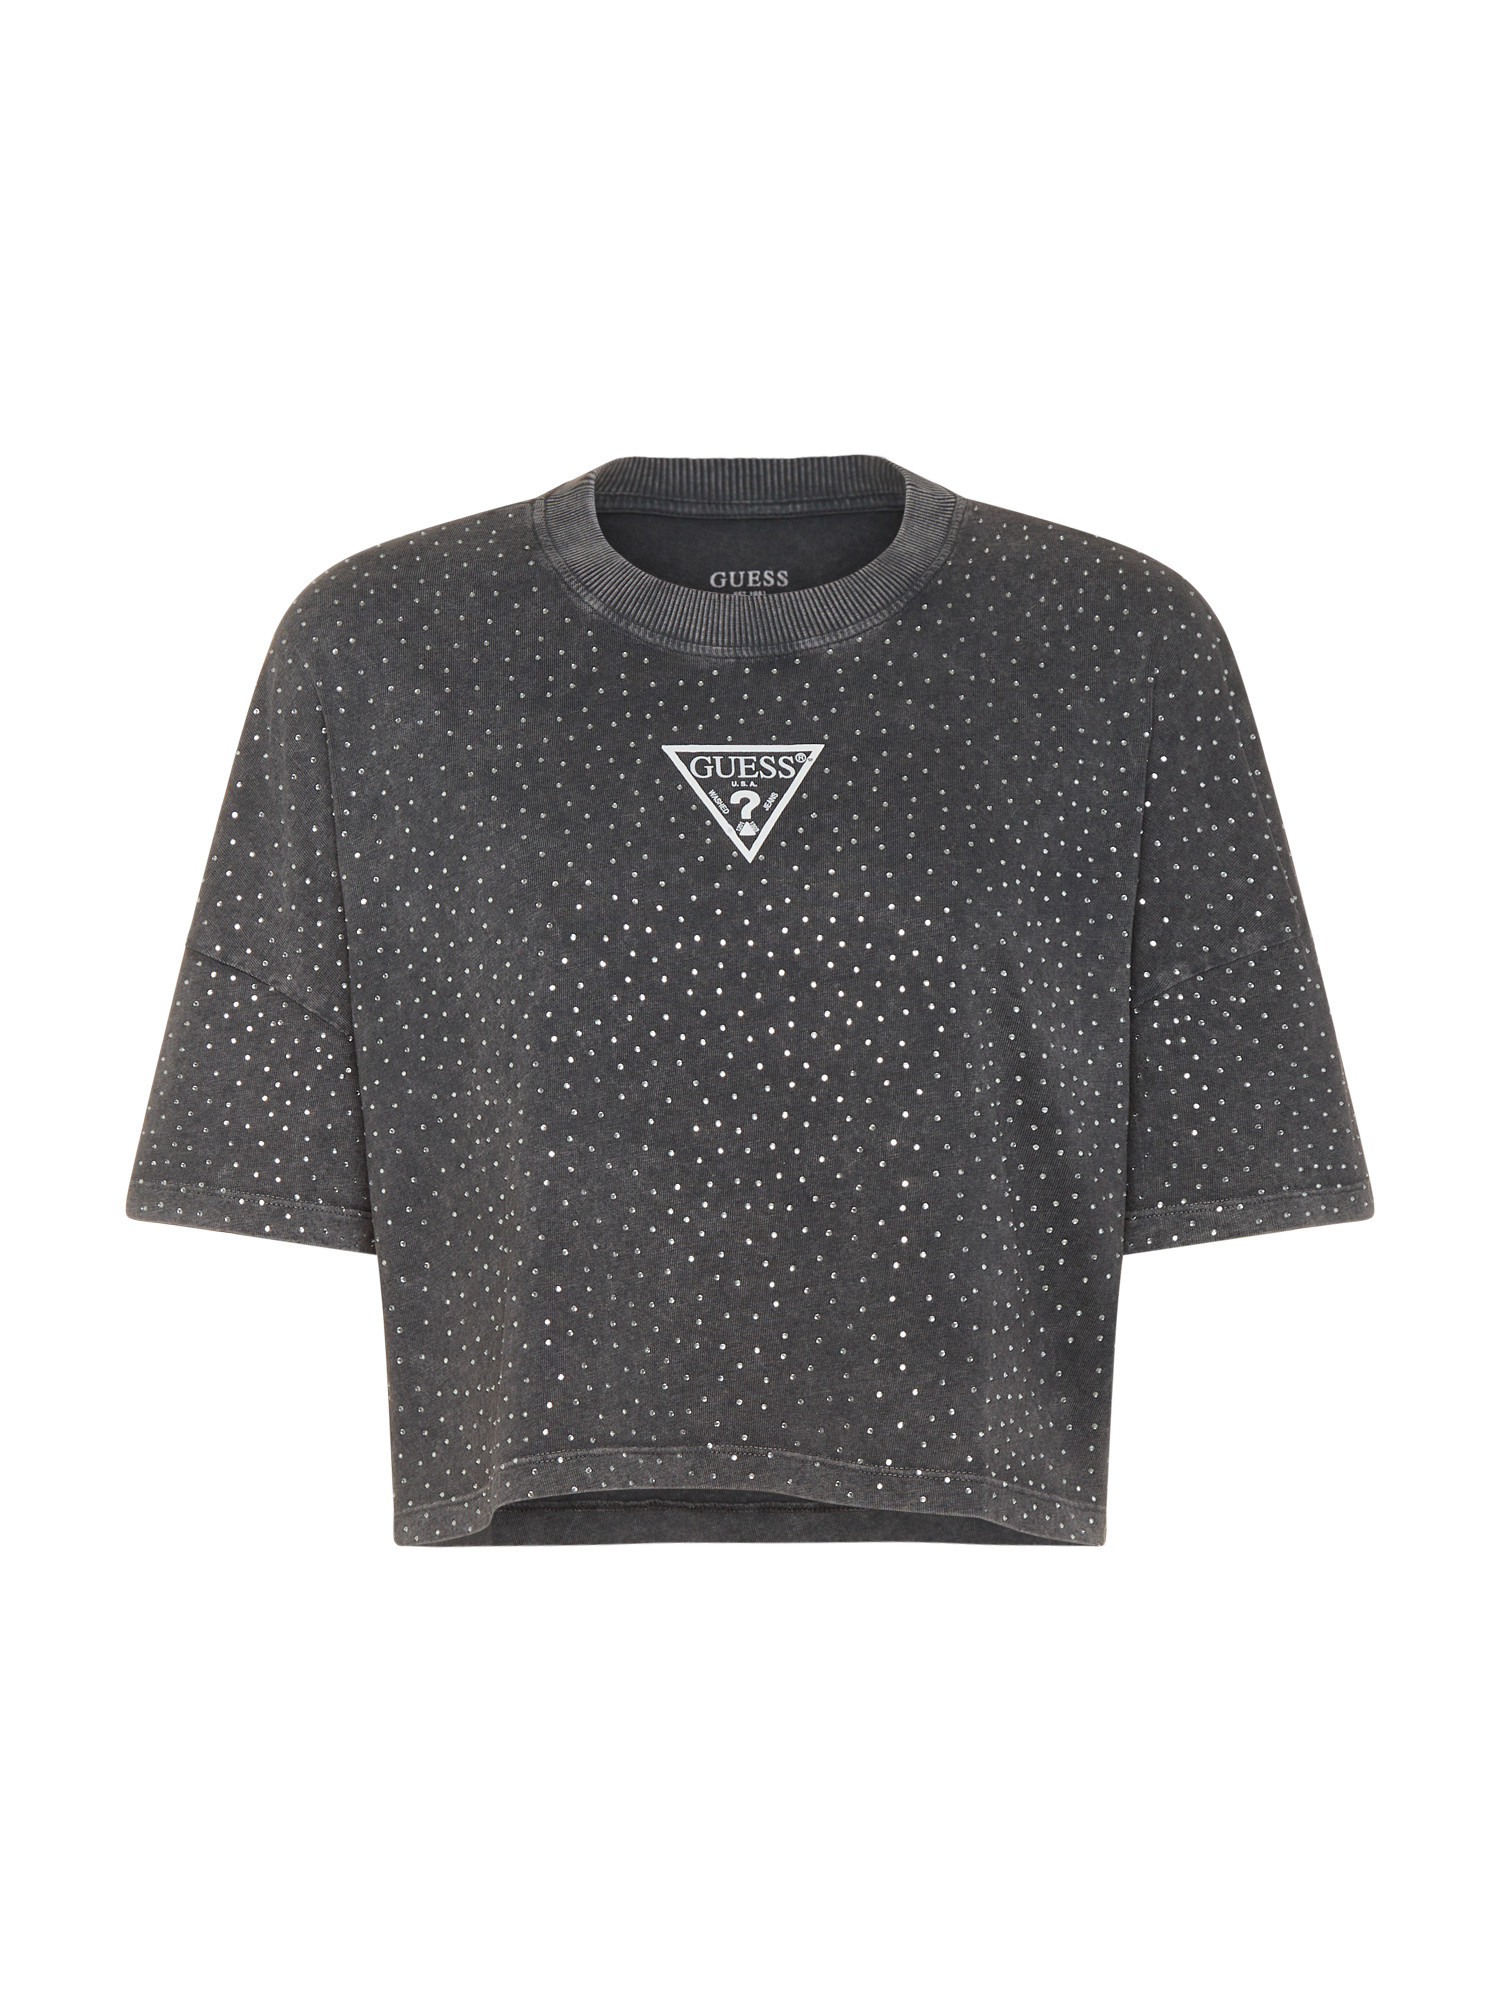 Guess - T-shirt with logo and rhinestones, Grey, large image number 0